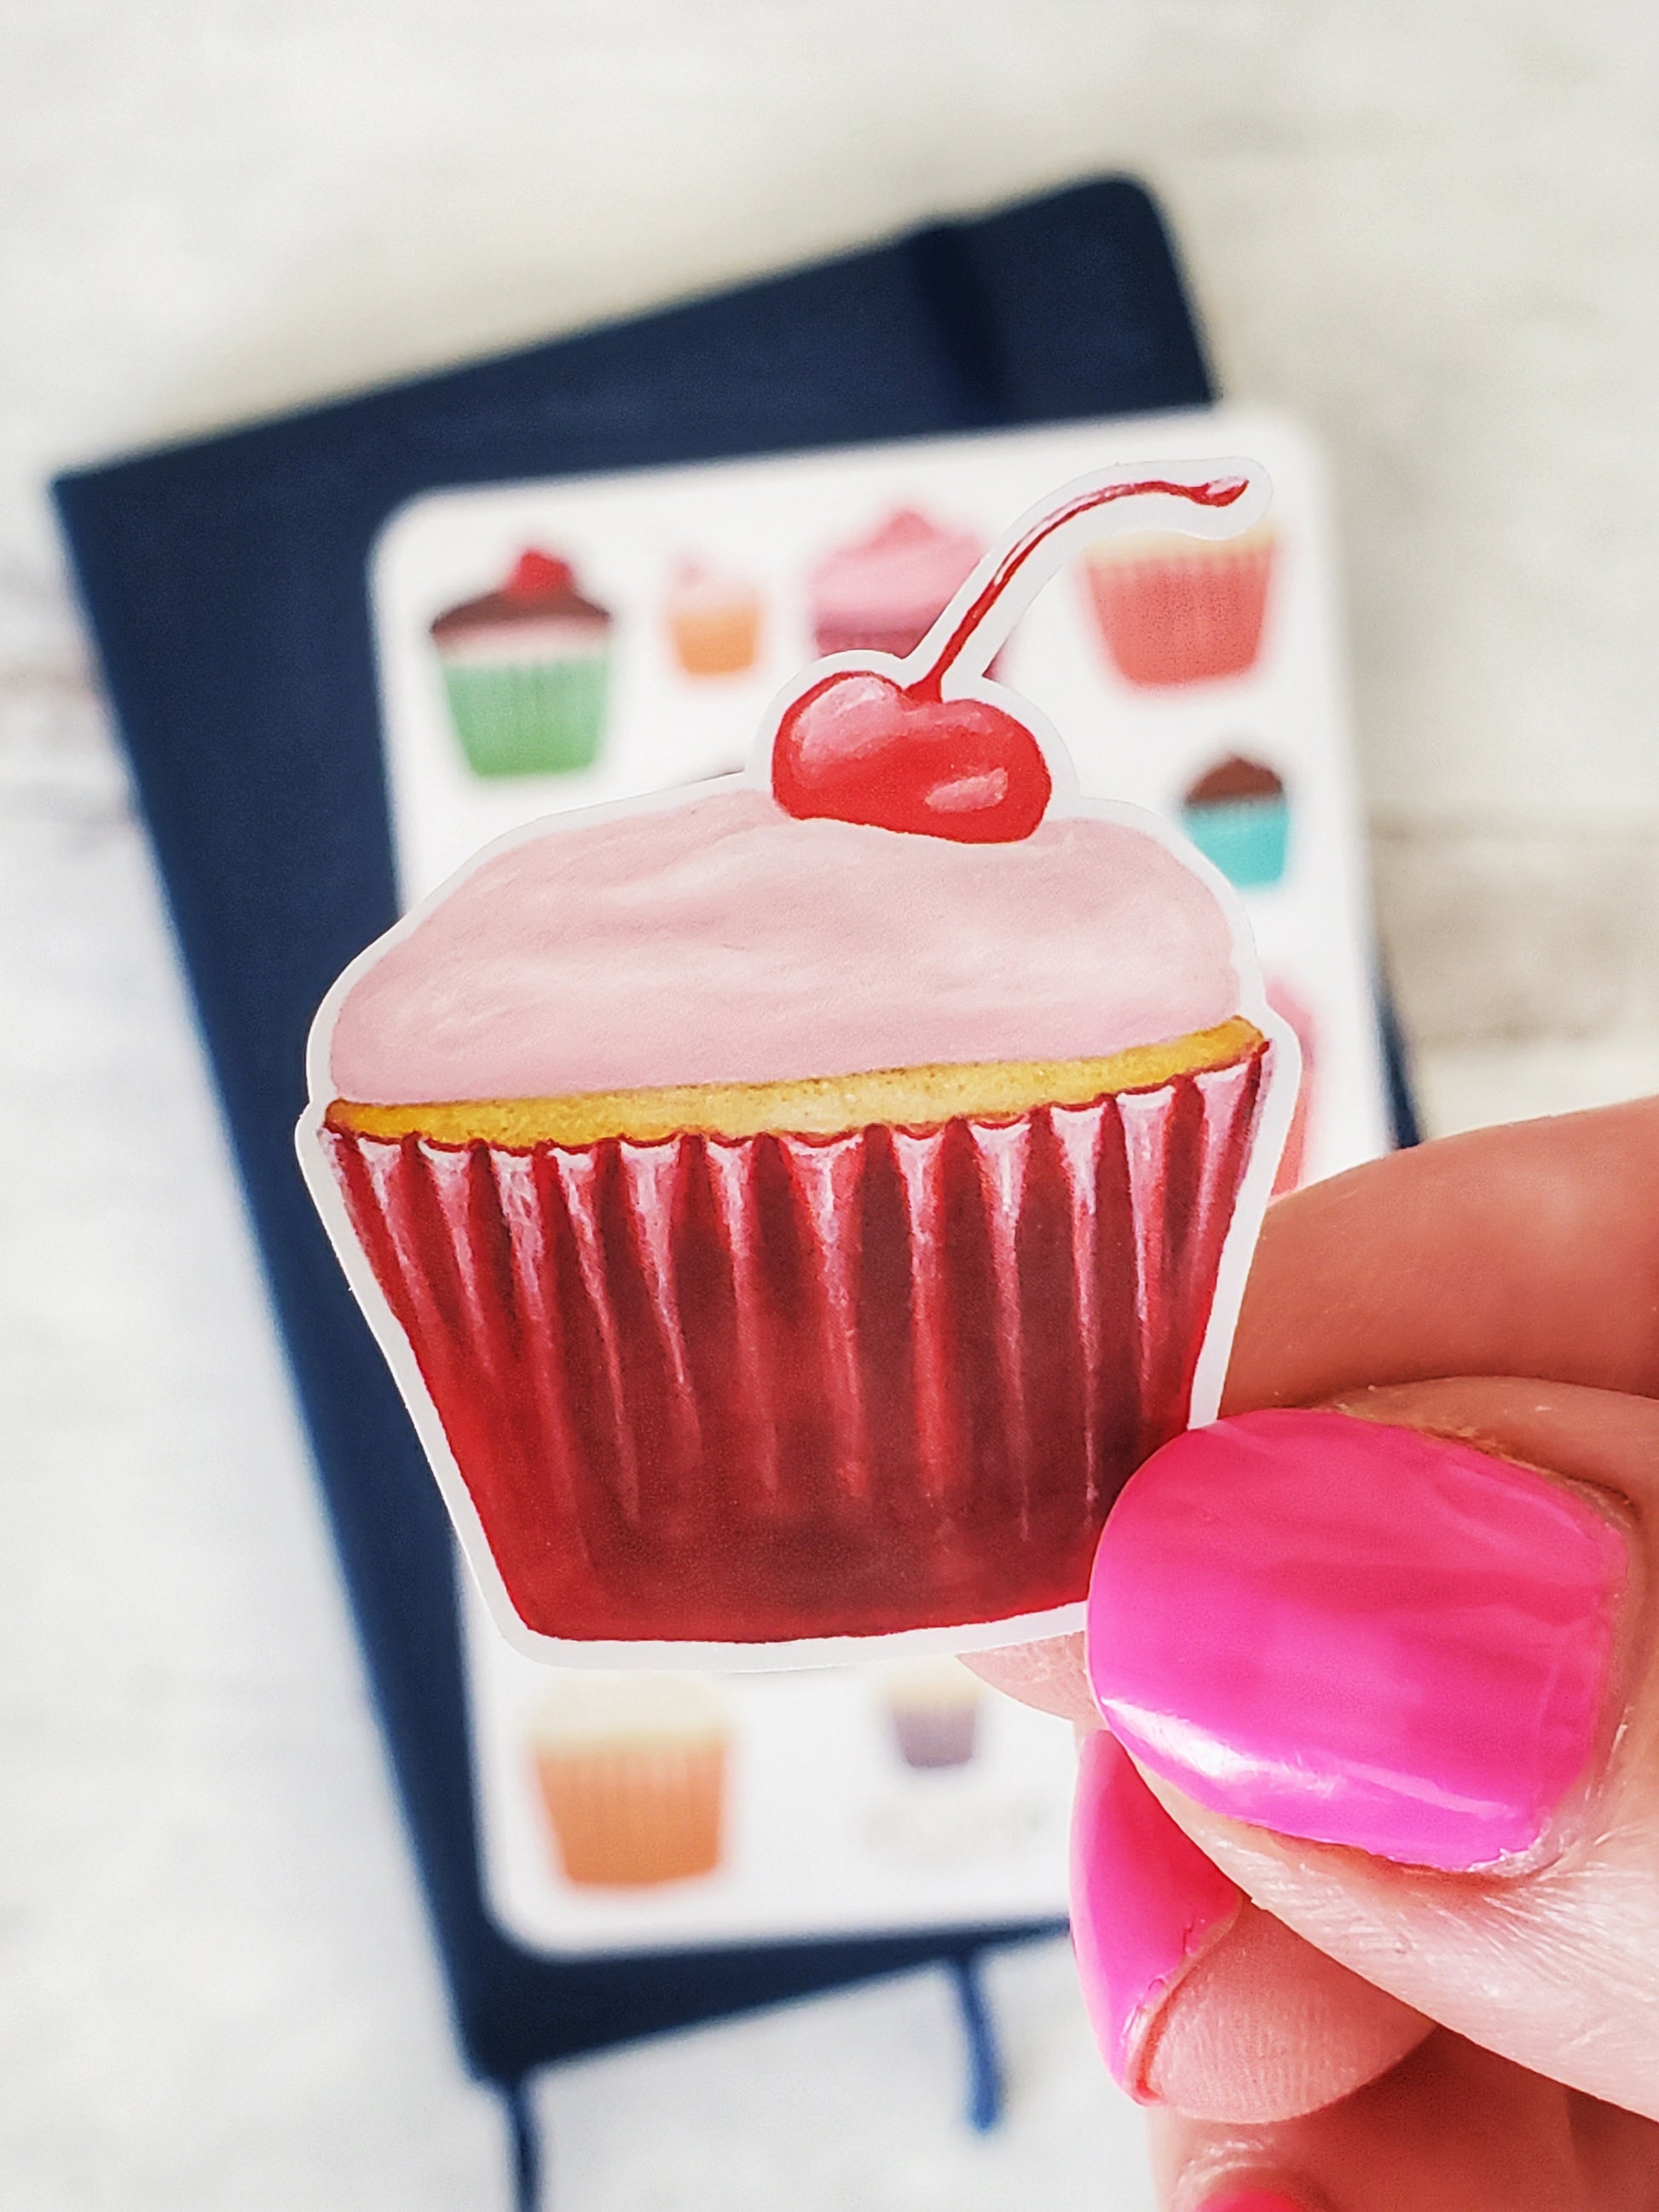 A close up of the cherry cupcake with pink frosting and a cherry on top.